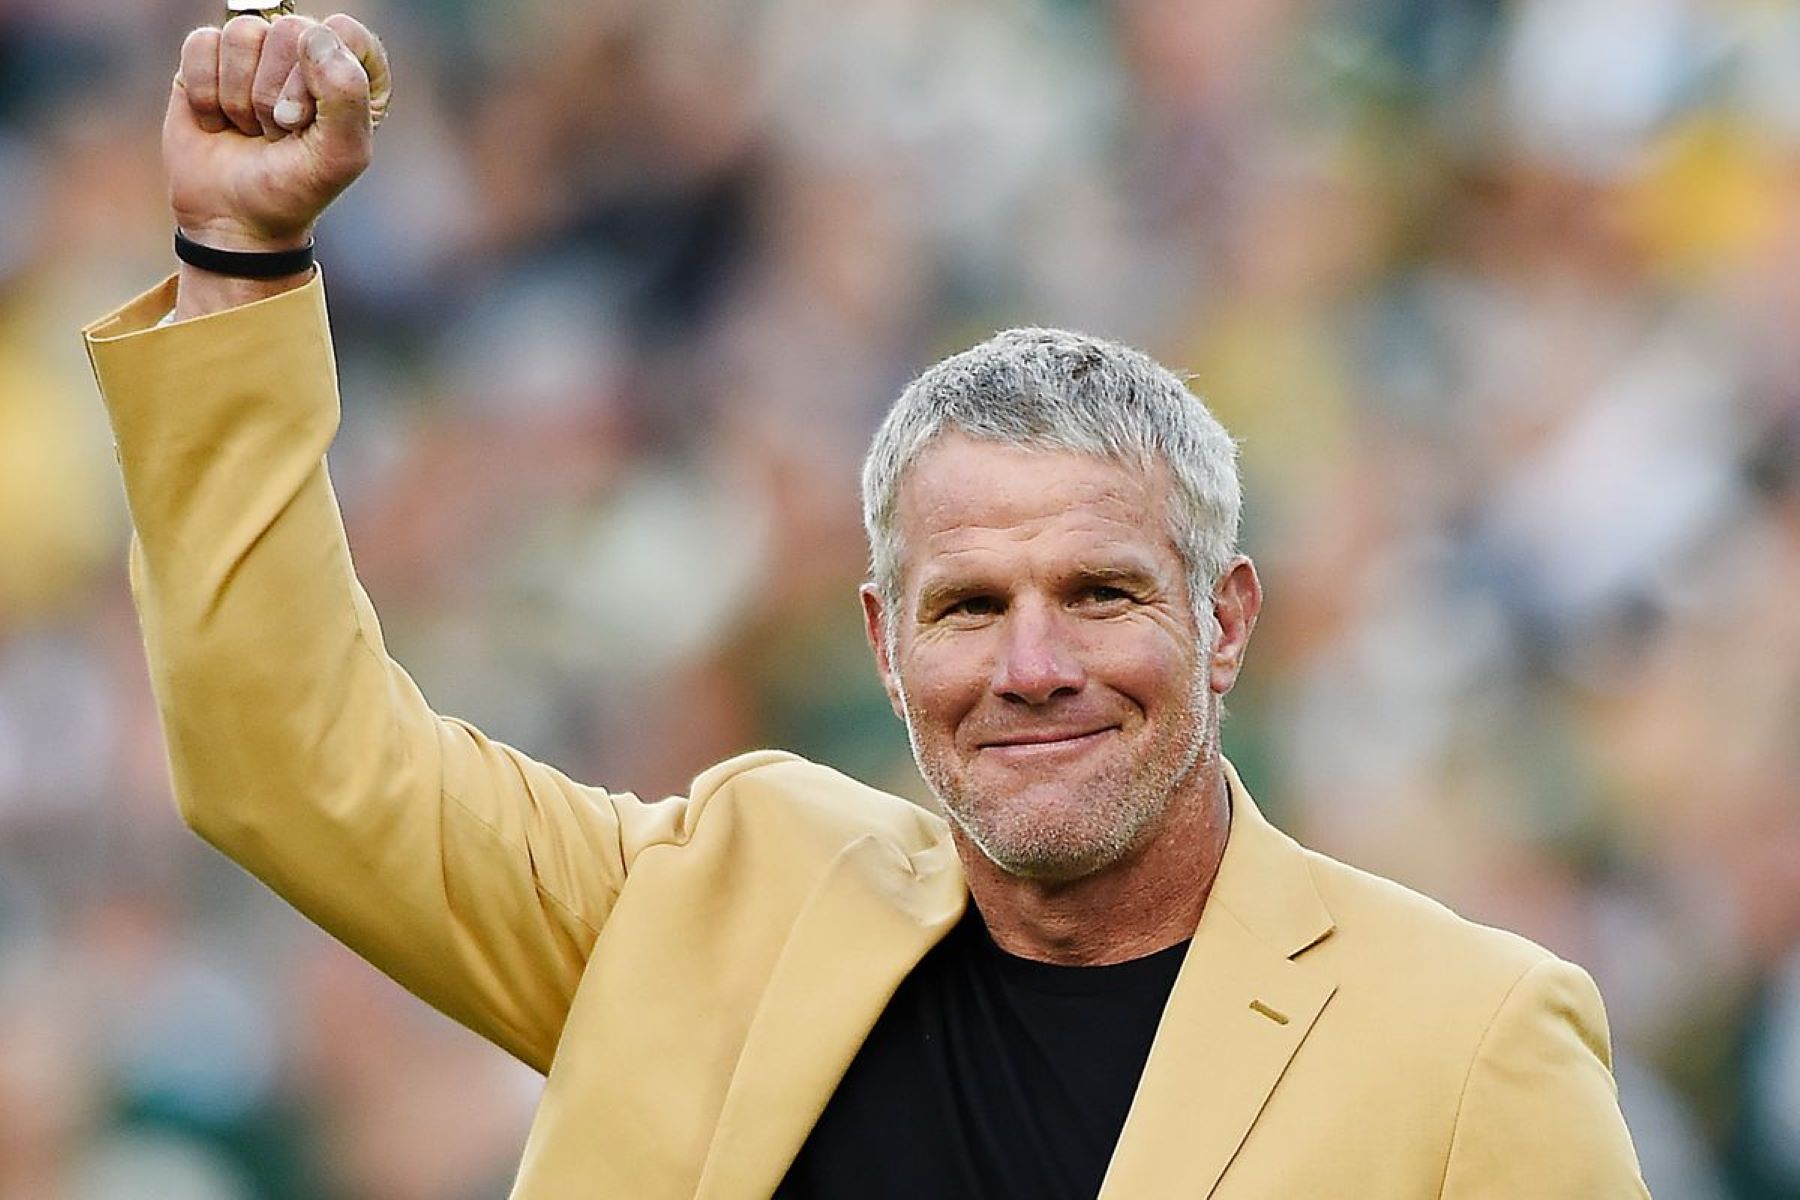 brett-favre-wanted-deion-sanders-at-southern-miss-before-jsu-and-cu-success